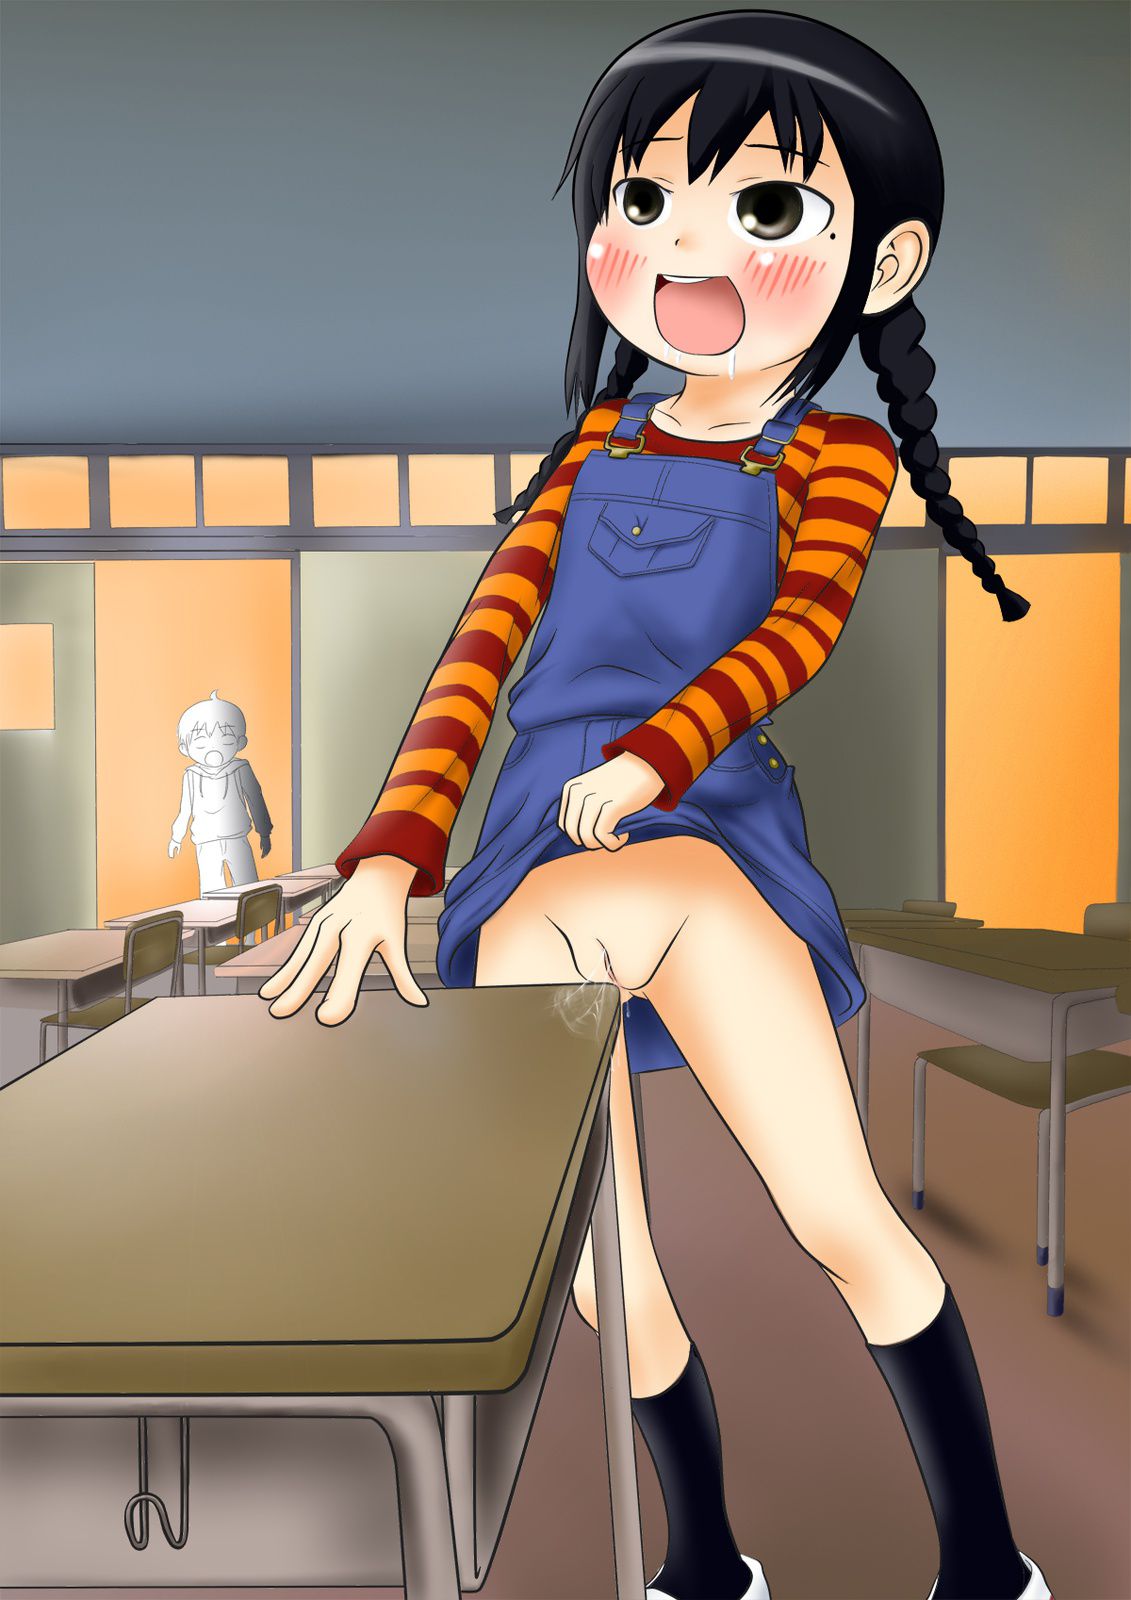 [Kaku Ona Lori Girl] Secondary erotic image of a secondary loli girl indulging in angular masturbation that she can't stand pressing her crotch against the desk 52